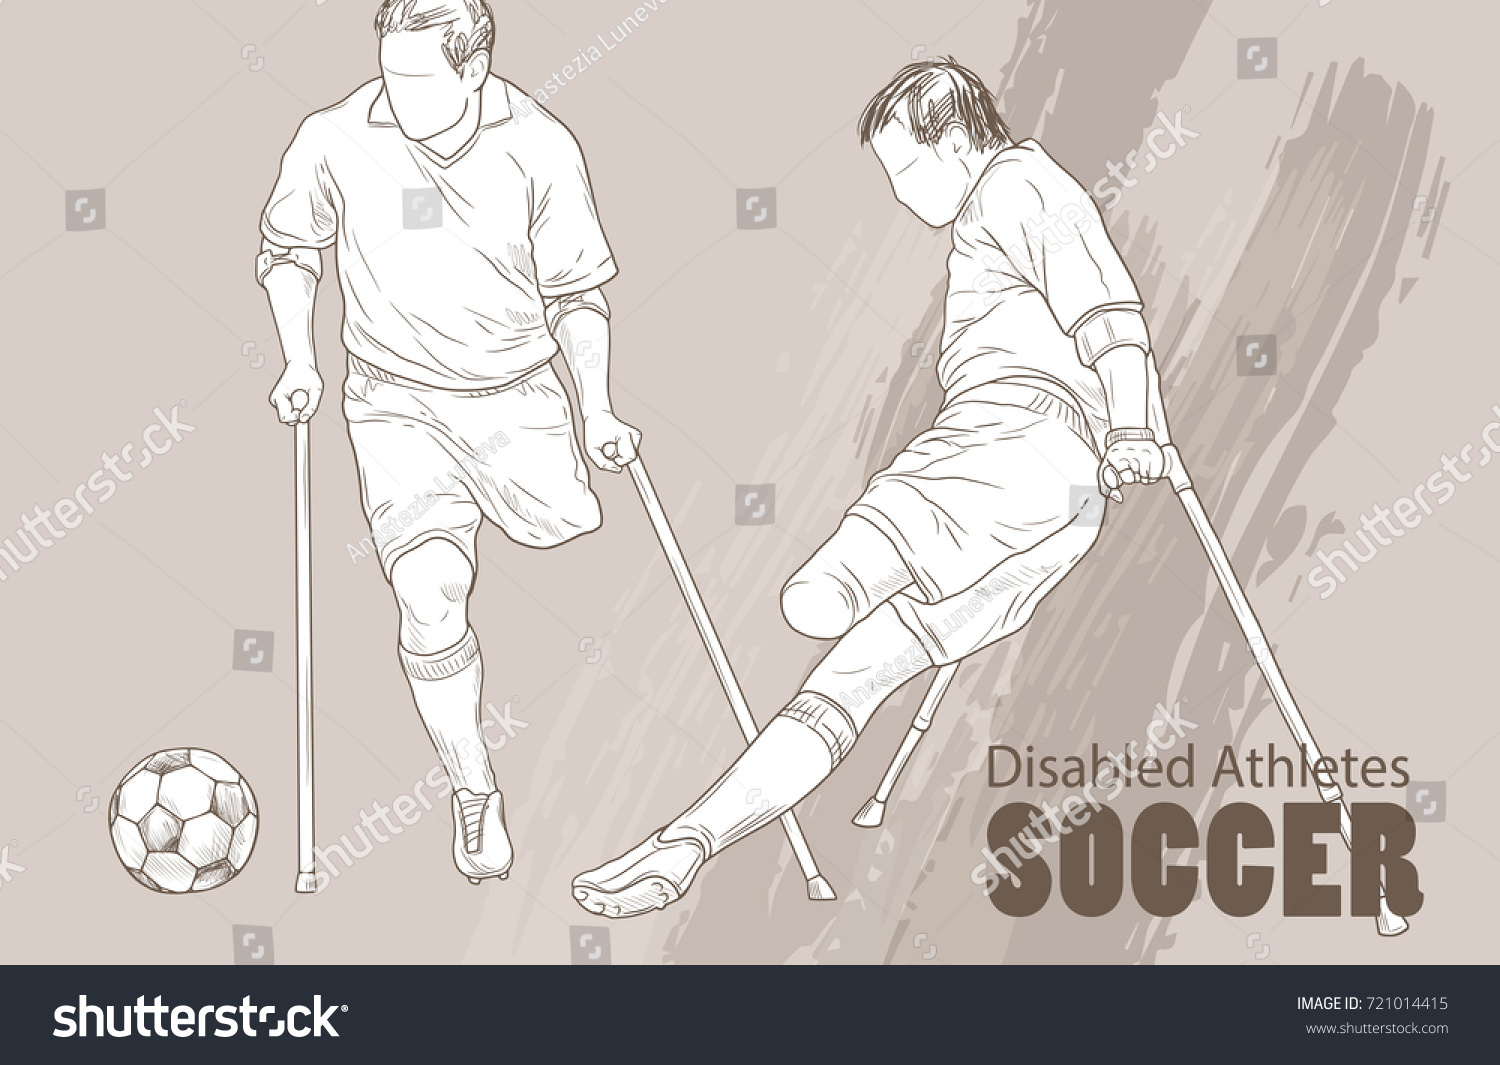 SVG of Hand drawn illustration. Amputee Football players. Vector sketch sport. Graphic silhouette of disabled athletes on crutches with a ball. Active people. Recreation lifestyle. Man. Handicapped people. svg